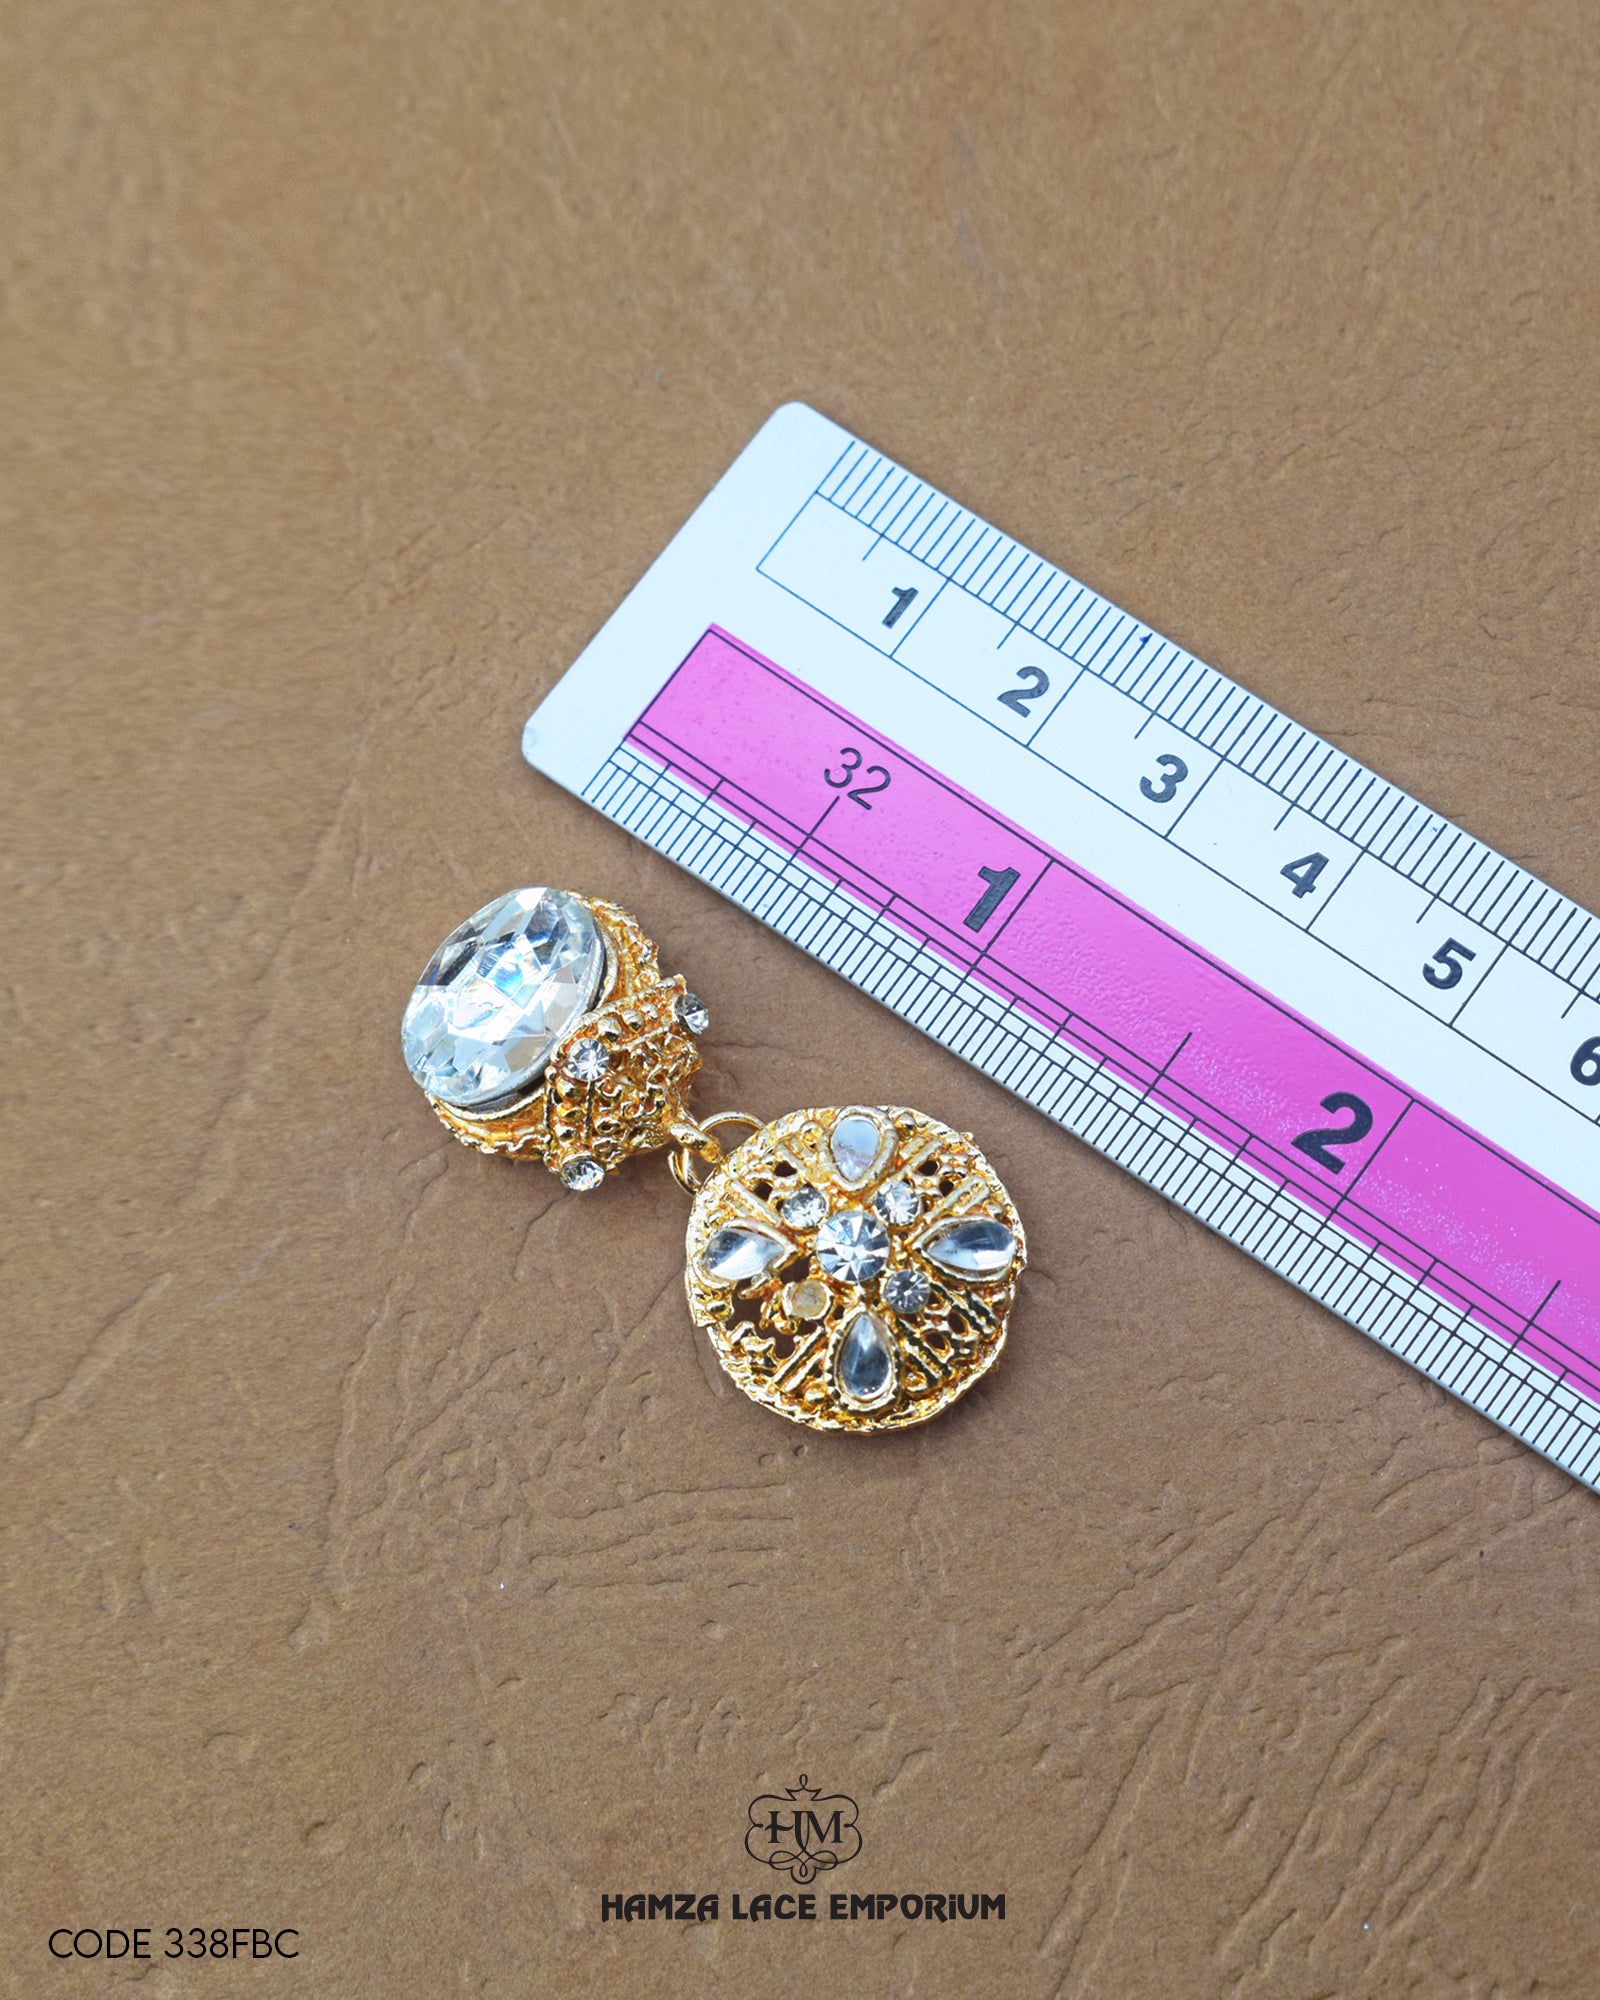 'Fancy Button 338FBC' with ruler for size reference in the product image.